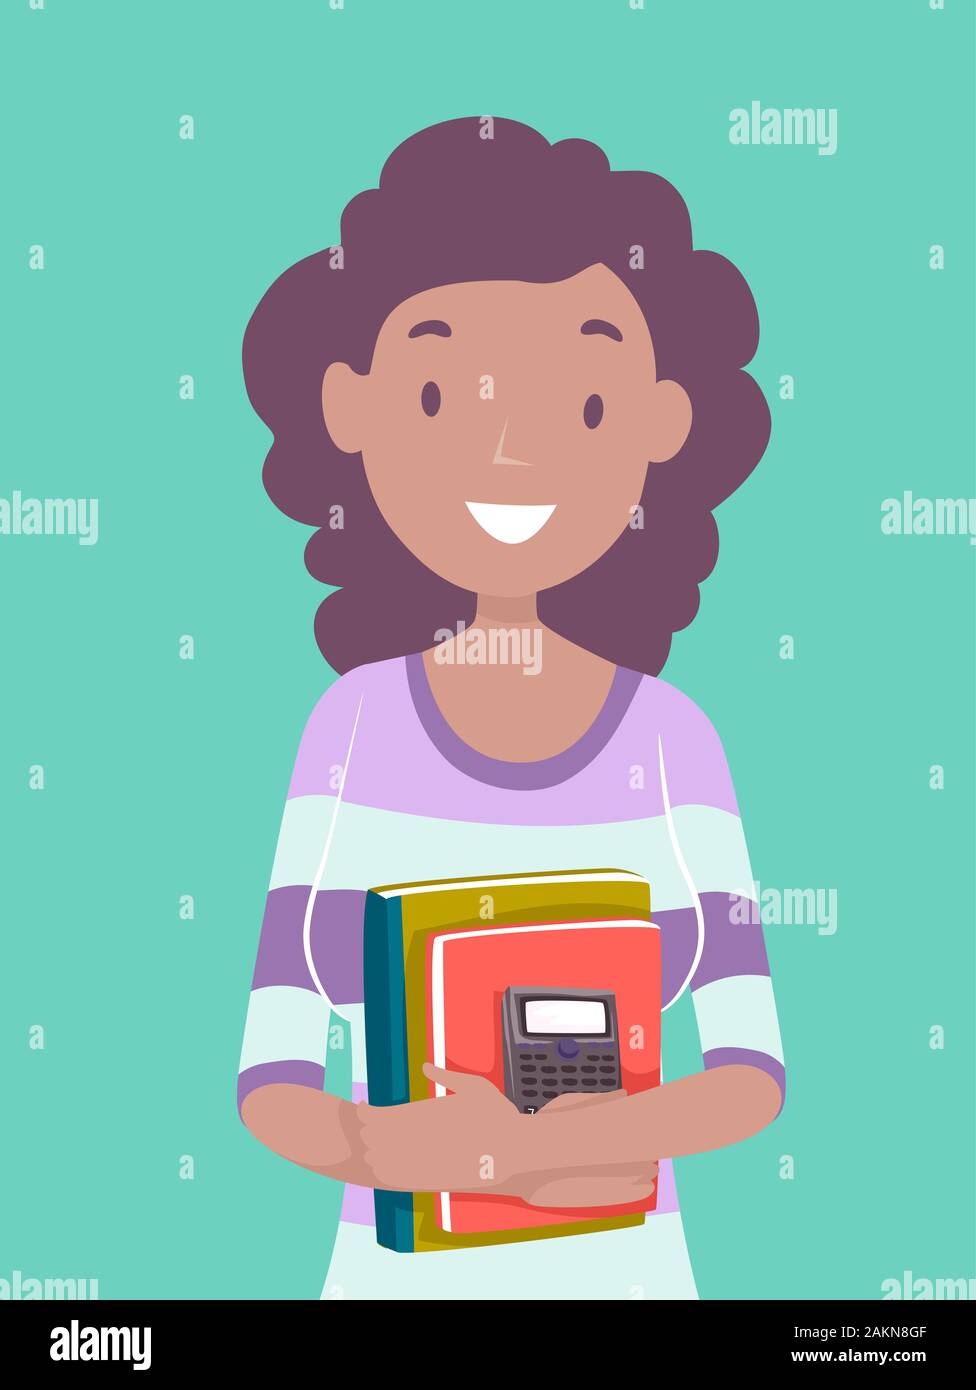 Illustration of a Teenage Girl African American Holding Books and a Calculator for An Accounting or Math Class Stock Photo